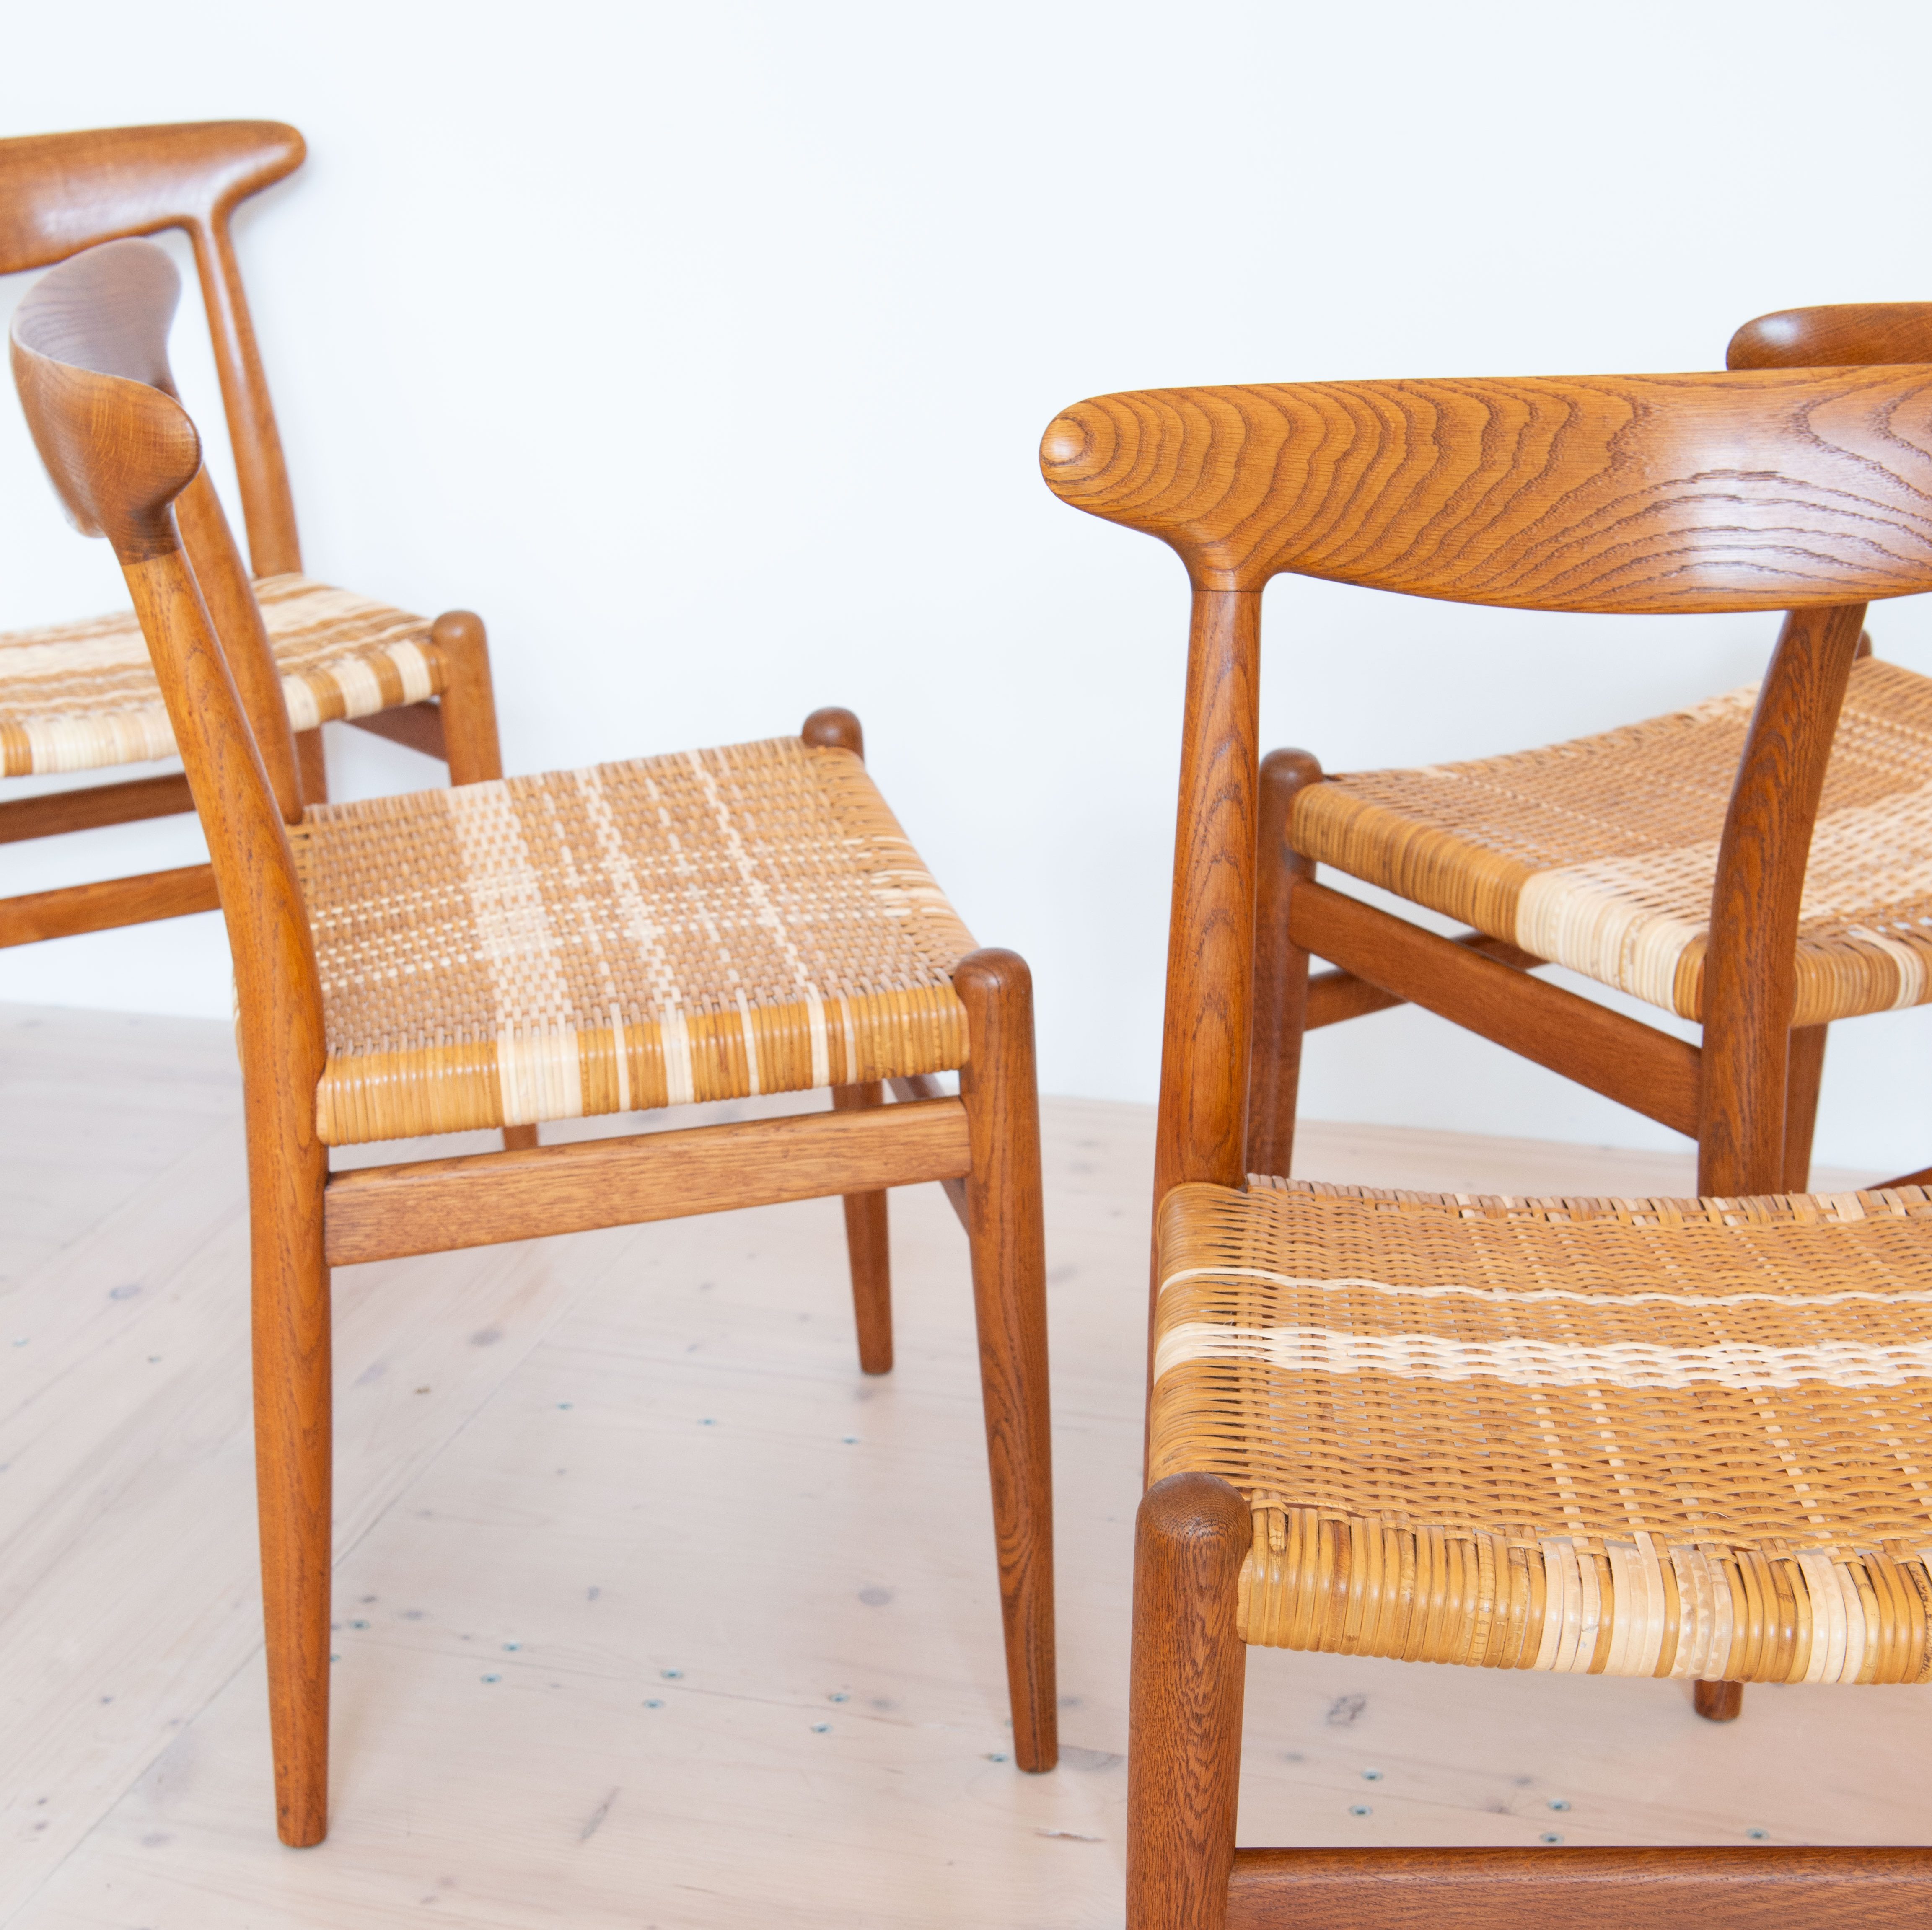 Hans J. Wegner W2 Dining Chair Set in Oak with Wicker Seating. Produced by C.M. Madsen, Denmark 1950s. Available at heyday möbel, Grubenstrasse 19, 8045 Zürich